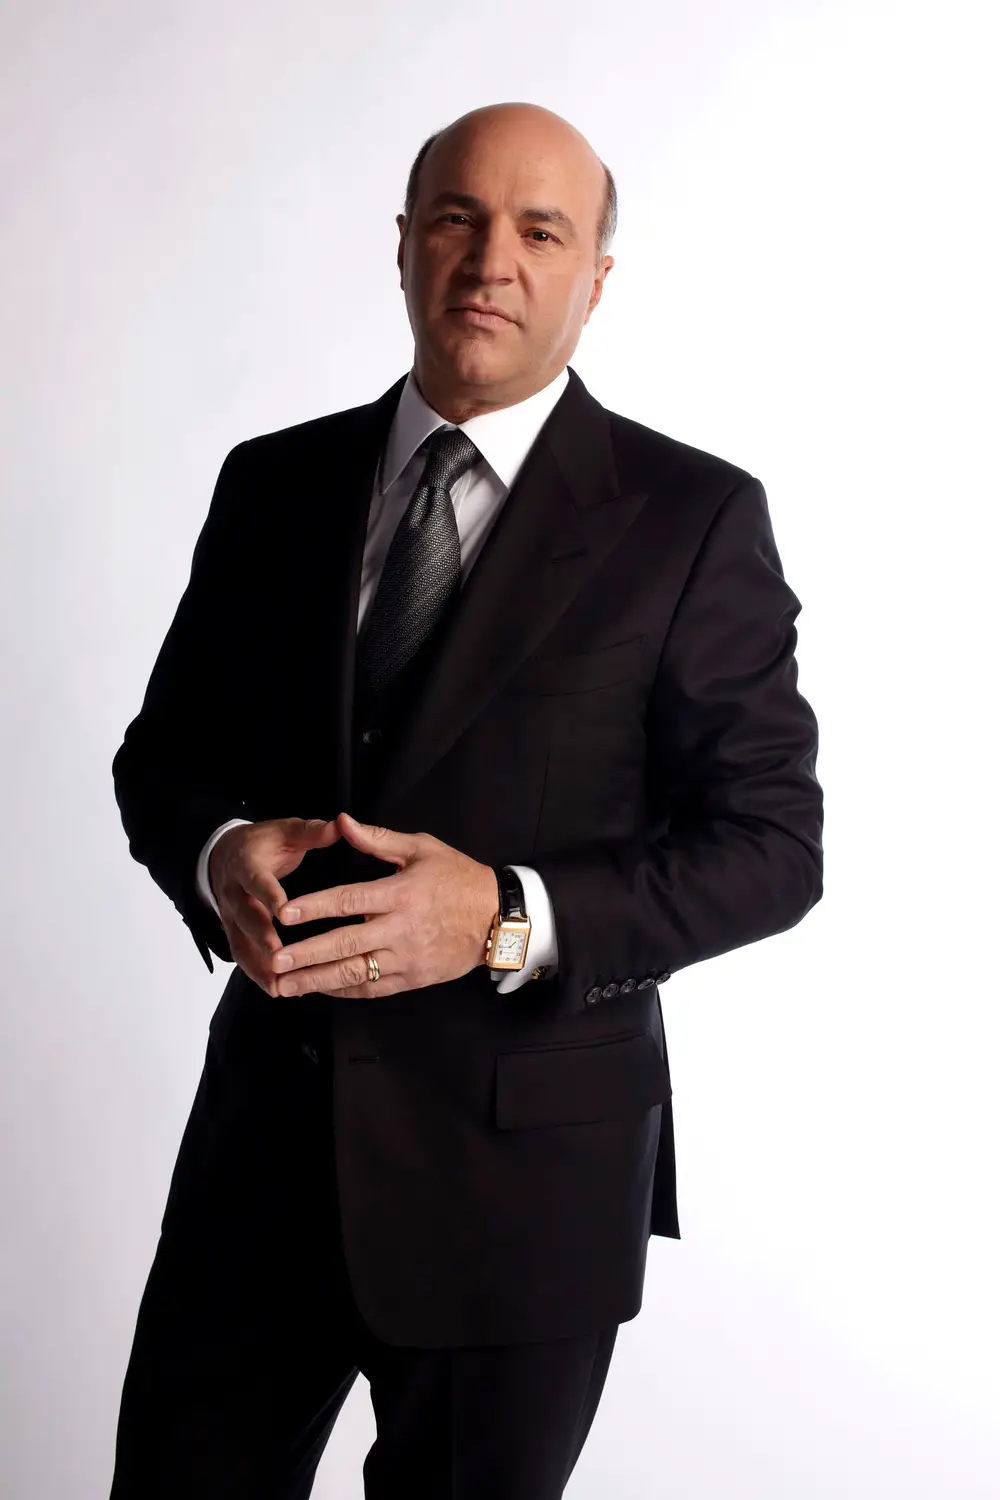 Kevin O’Leary Net Worth, Income & Salary